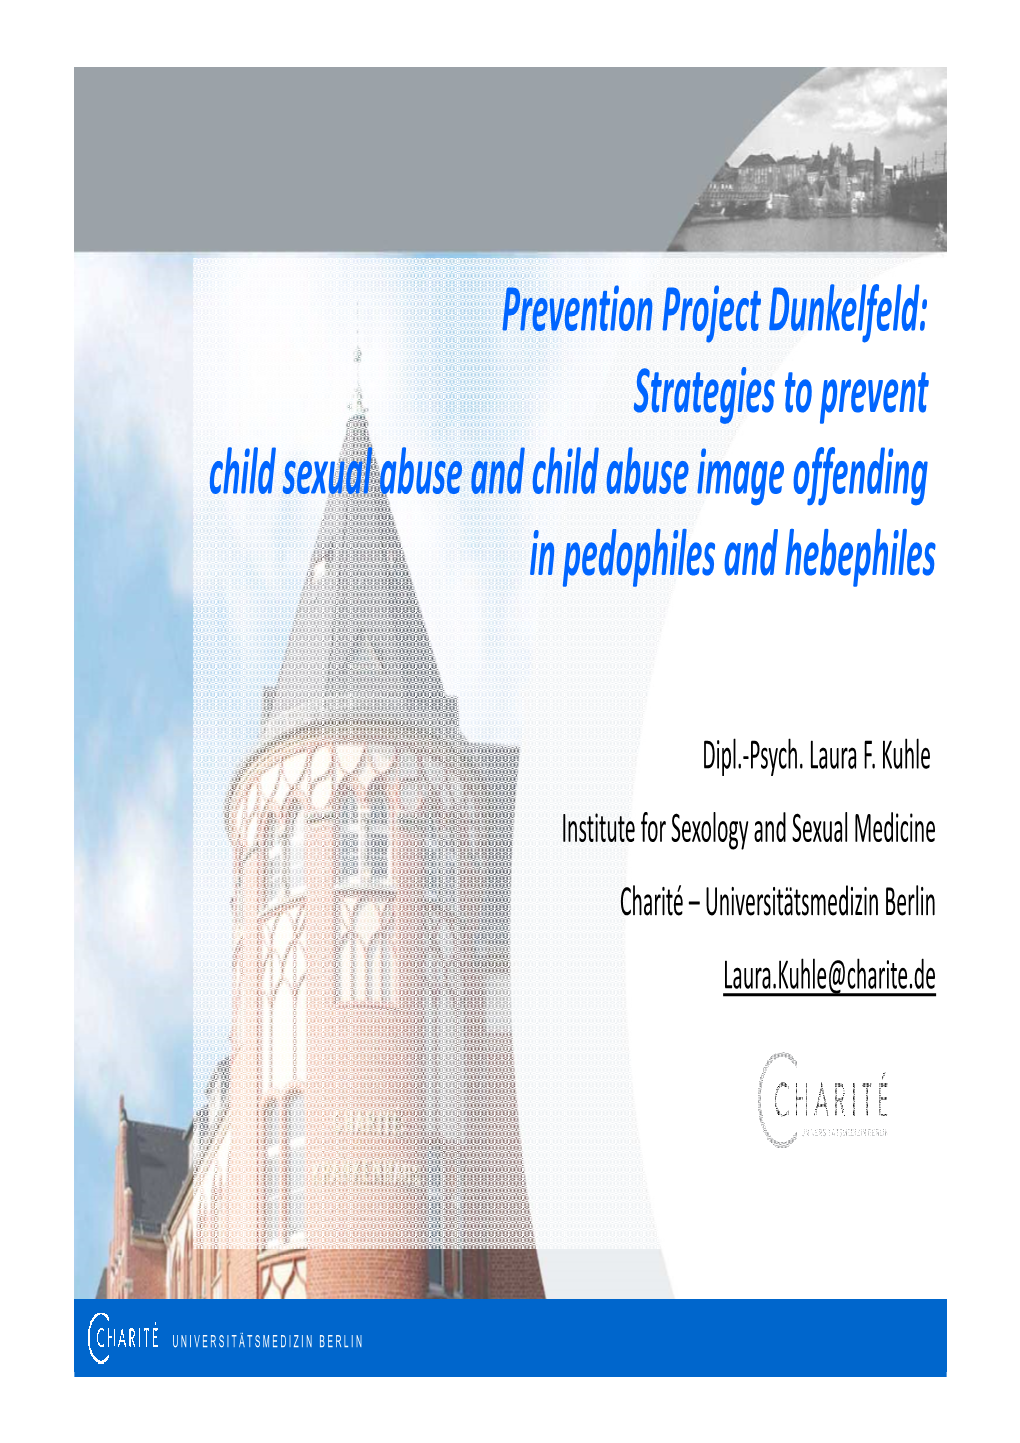 Prevention Project Dunkelfeld: Strategies to Prevent Child Sexual Abuse and Child Abuse Image Offending in Pedophiles and Hebephiles